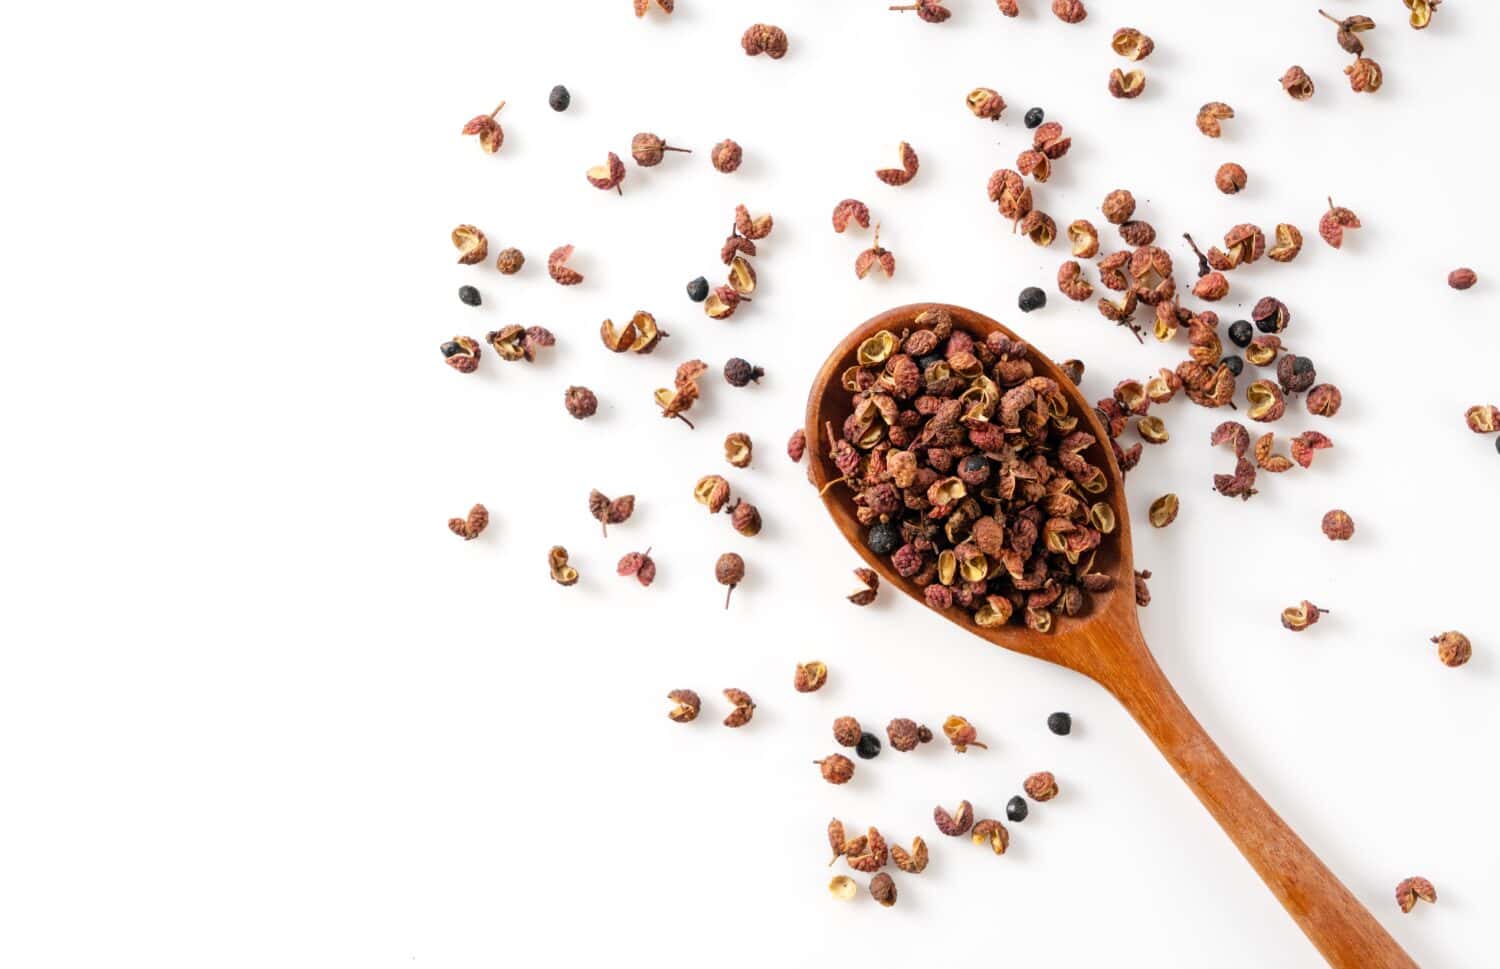 Sichuan pepper and wooden spoon set against a white background. Sichuan pepper is a member of the sansho family used in Chinese cuisine. View from above.